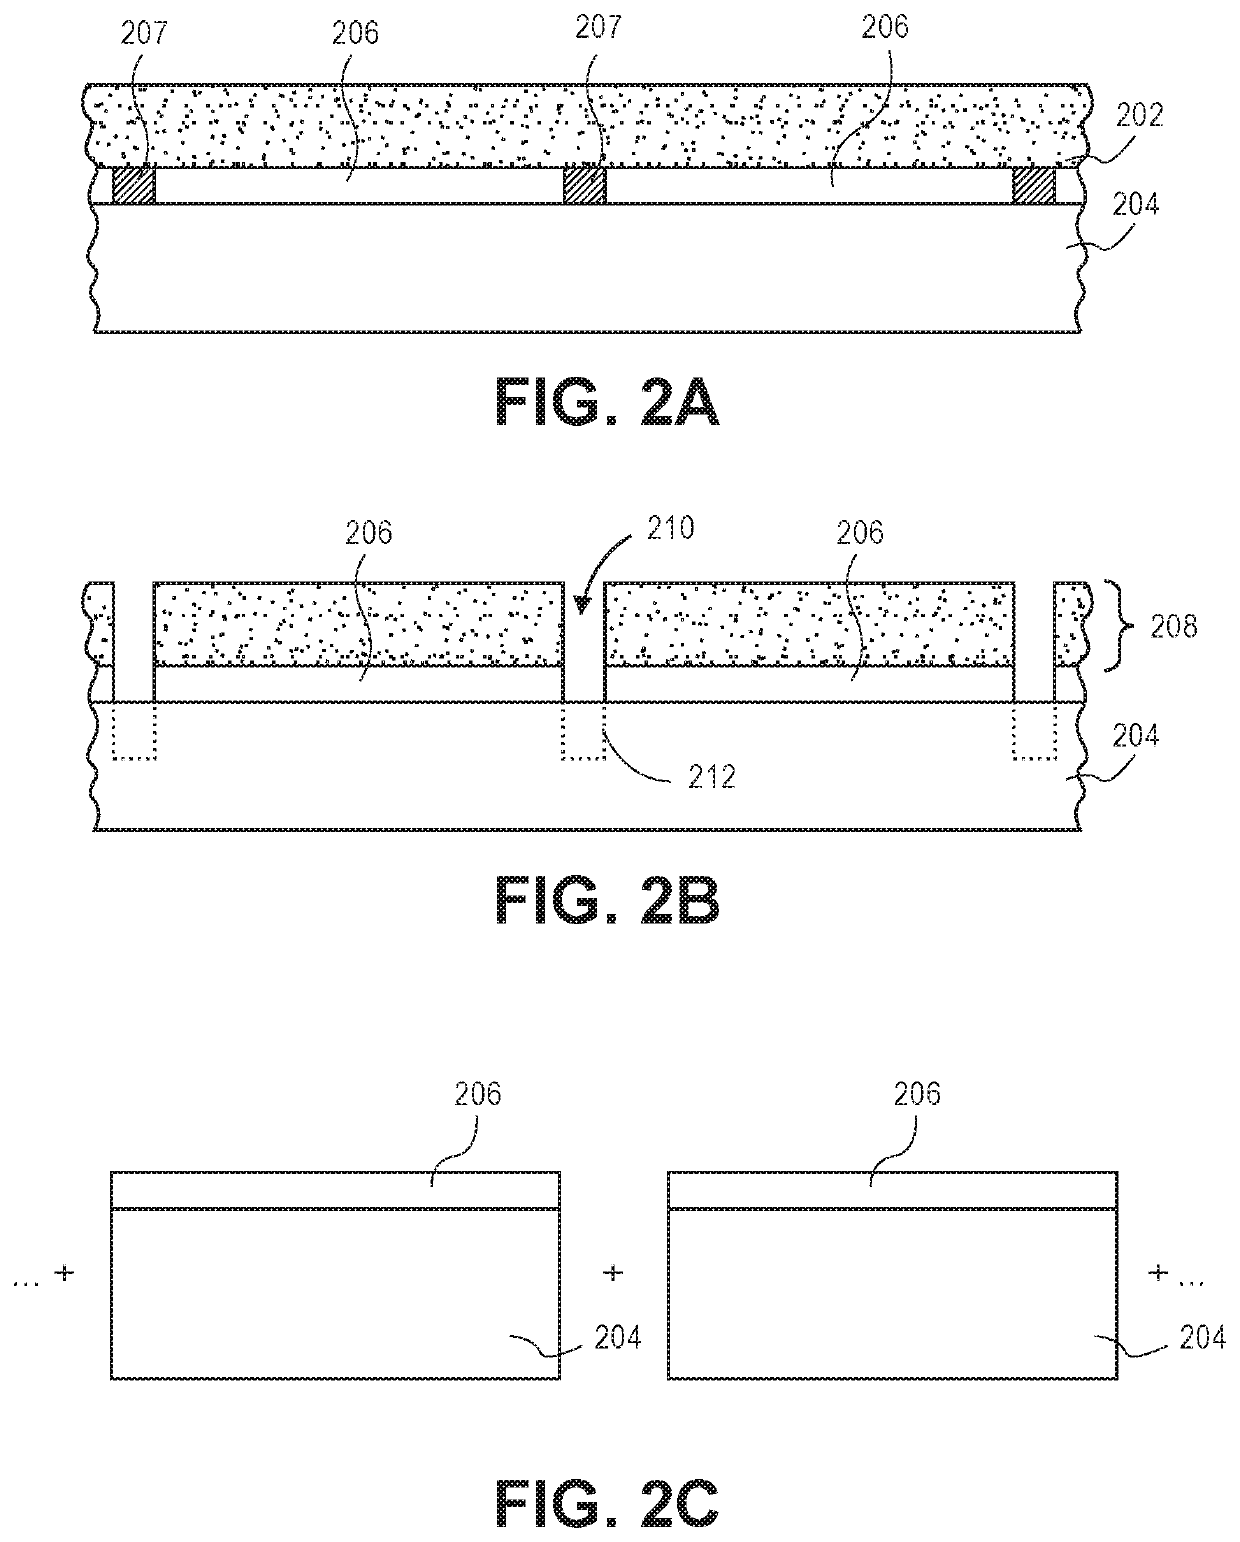 Hybrid wafer dicing approach using a uniform rotating beam laser scribing process and plasma etch process